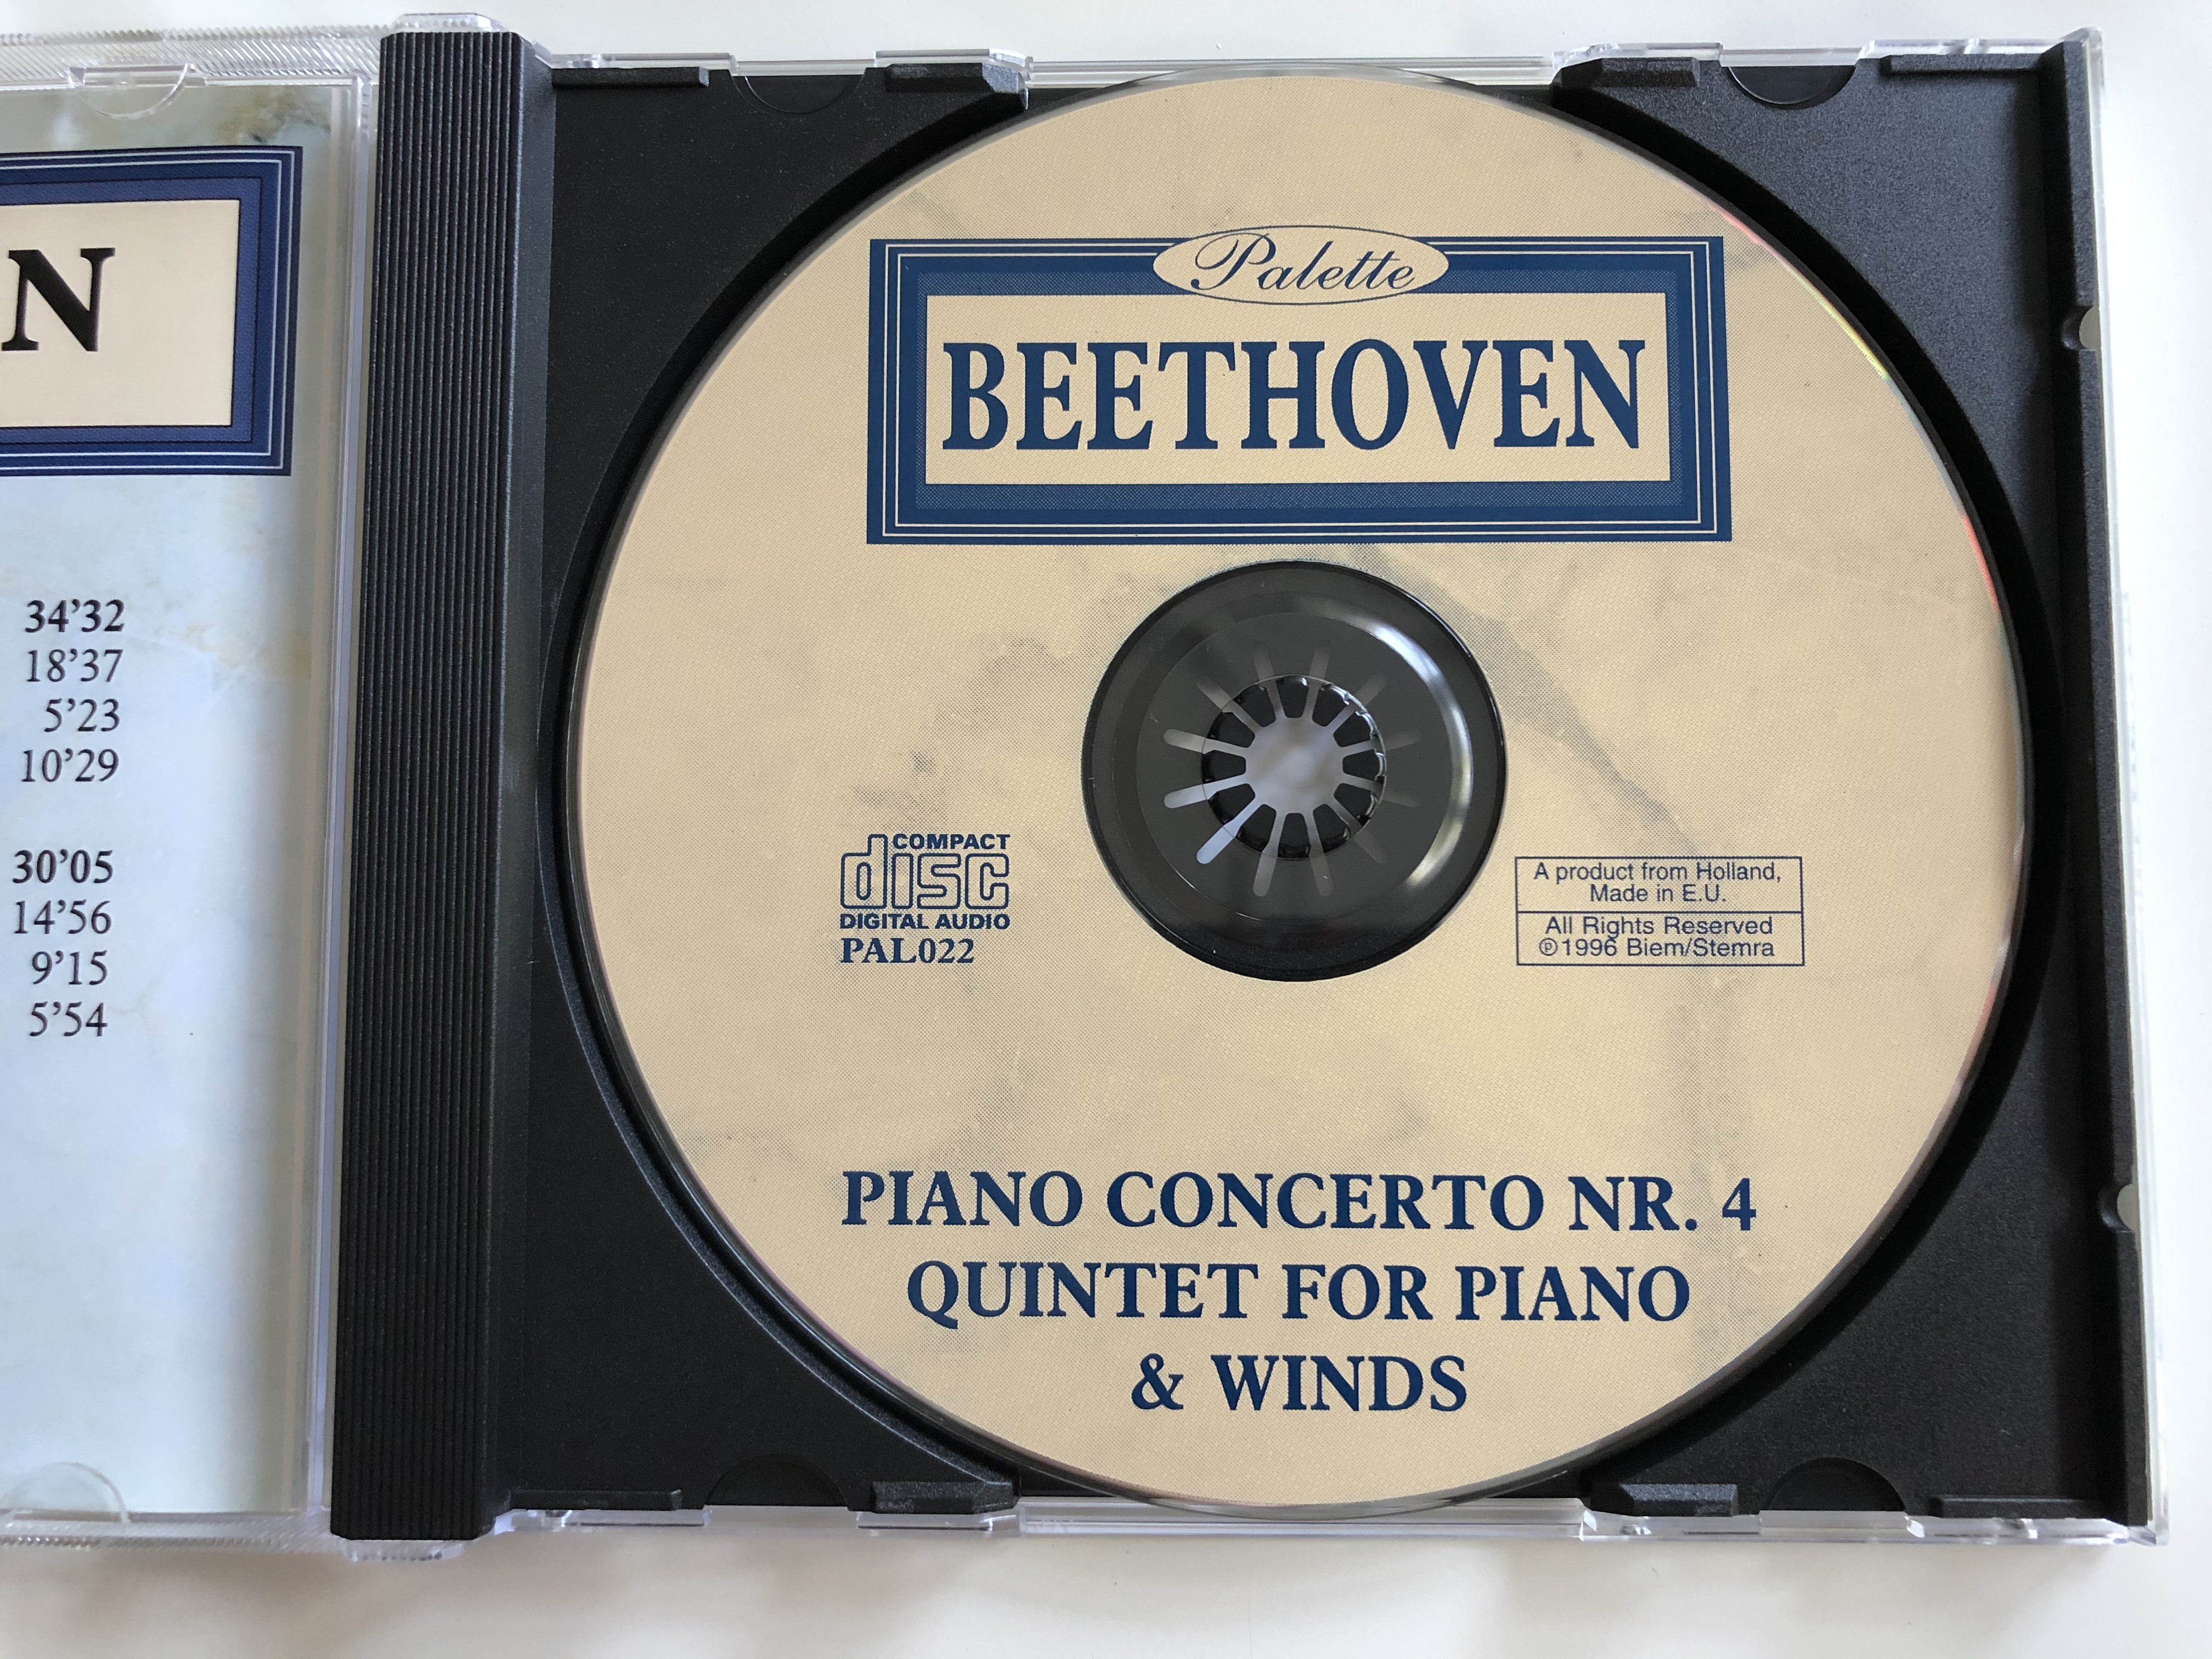 beethoven-piano-concerto-nr.-4-quintet-for-piano-winds-palette-audio-cd-1996-pal022-3-.jpg